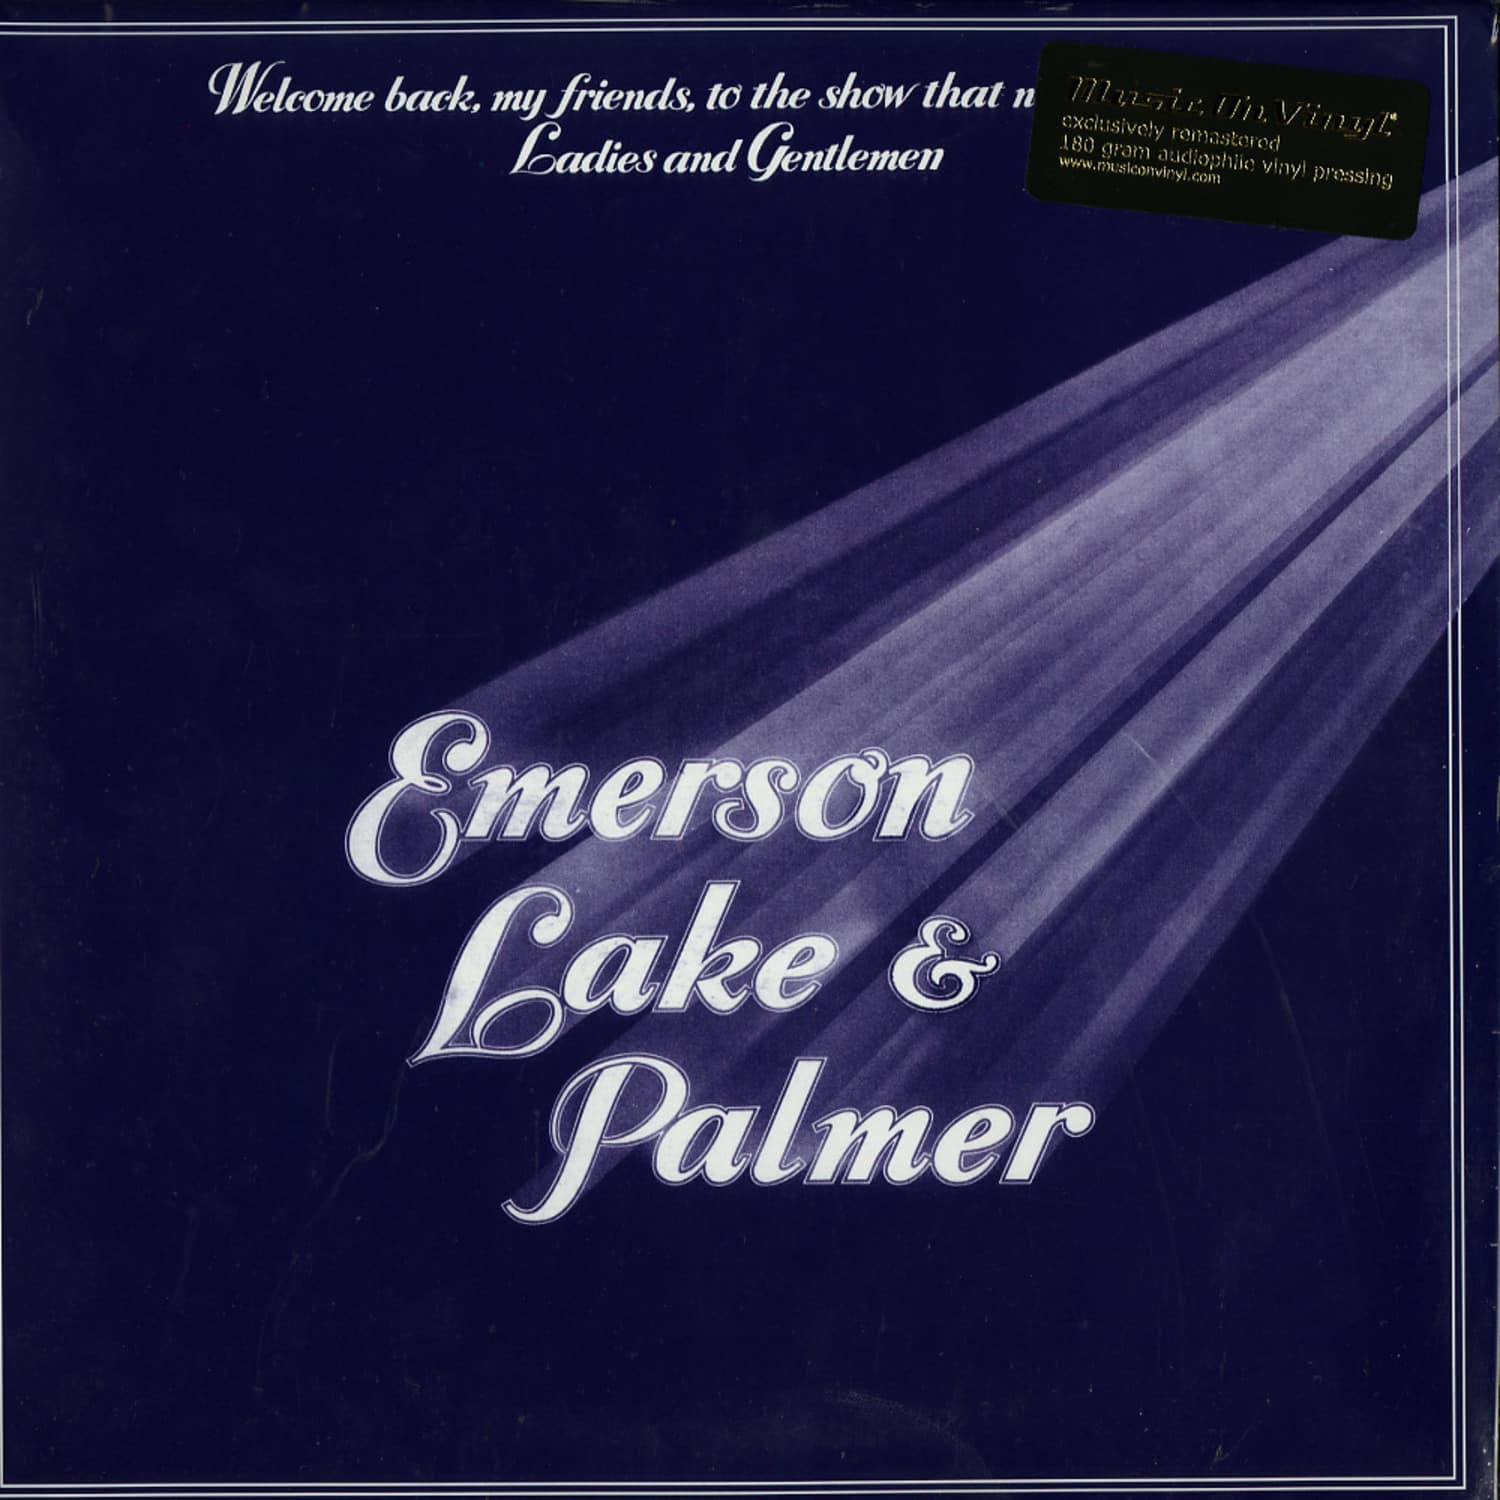 Emerson Lake & Palmer - WELCOME BACK MY FRIENDS, TO THE SHOW THAT NEVER ENDS - LADIES & GENTLEMEN 